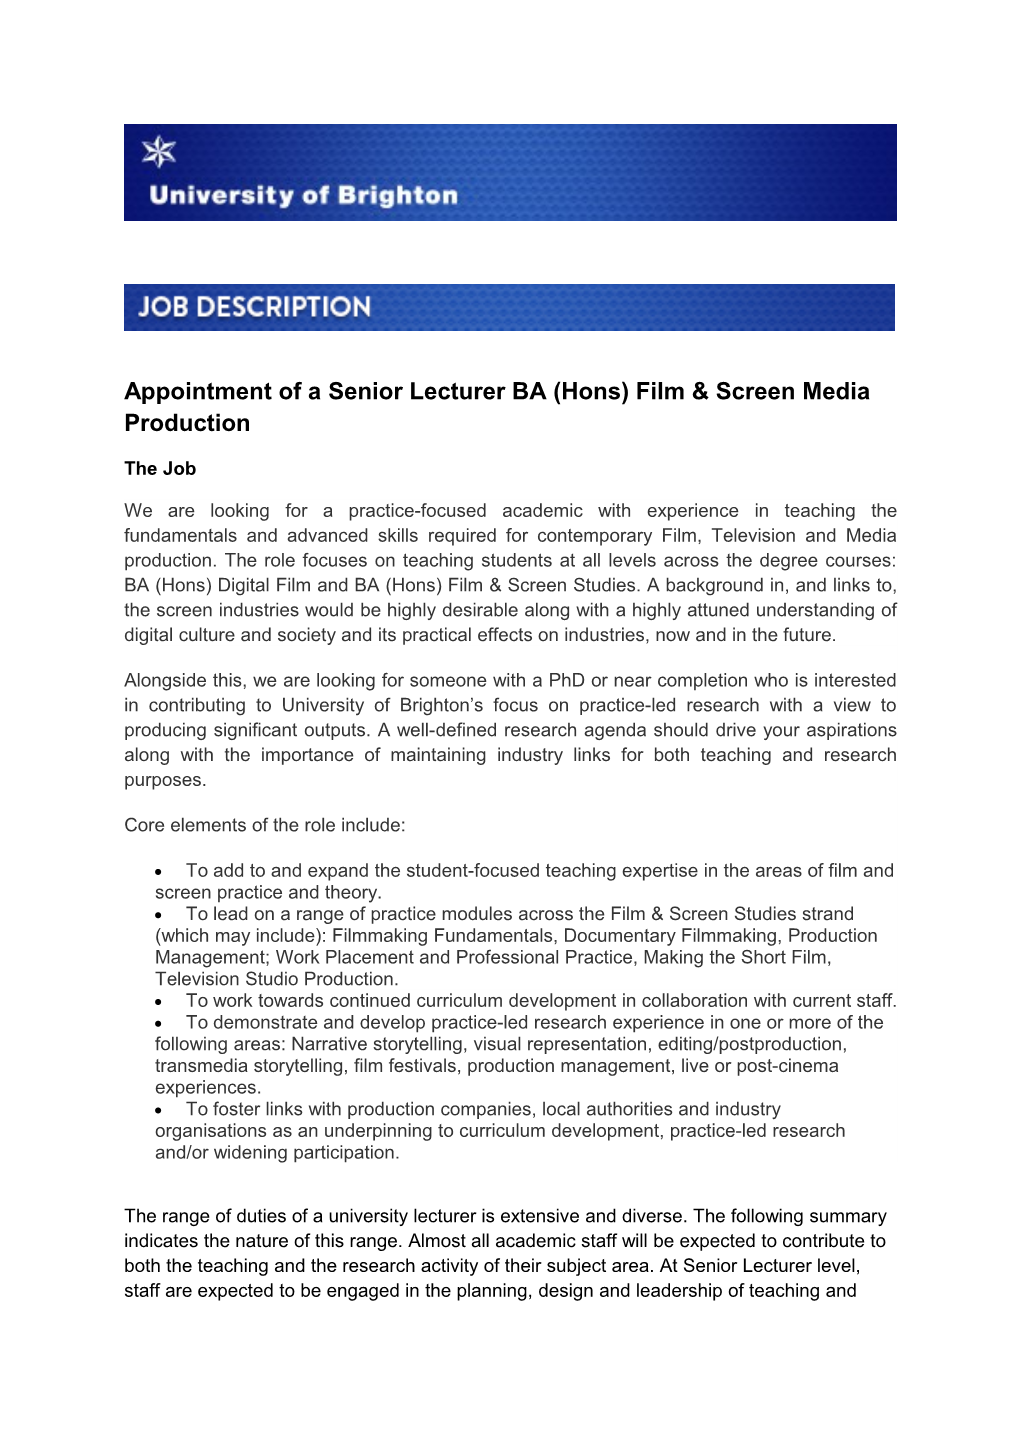 Appointment of a Senior Lecturer BA (Hons) Film & Screen Media Production